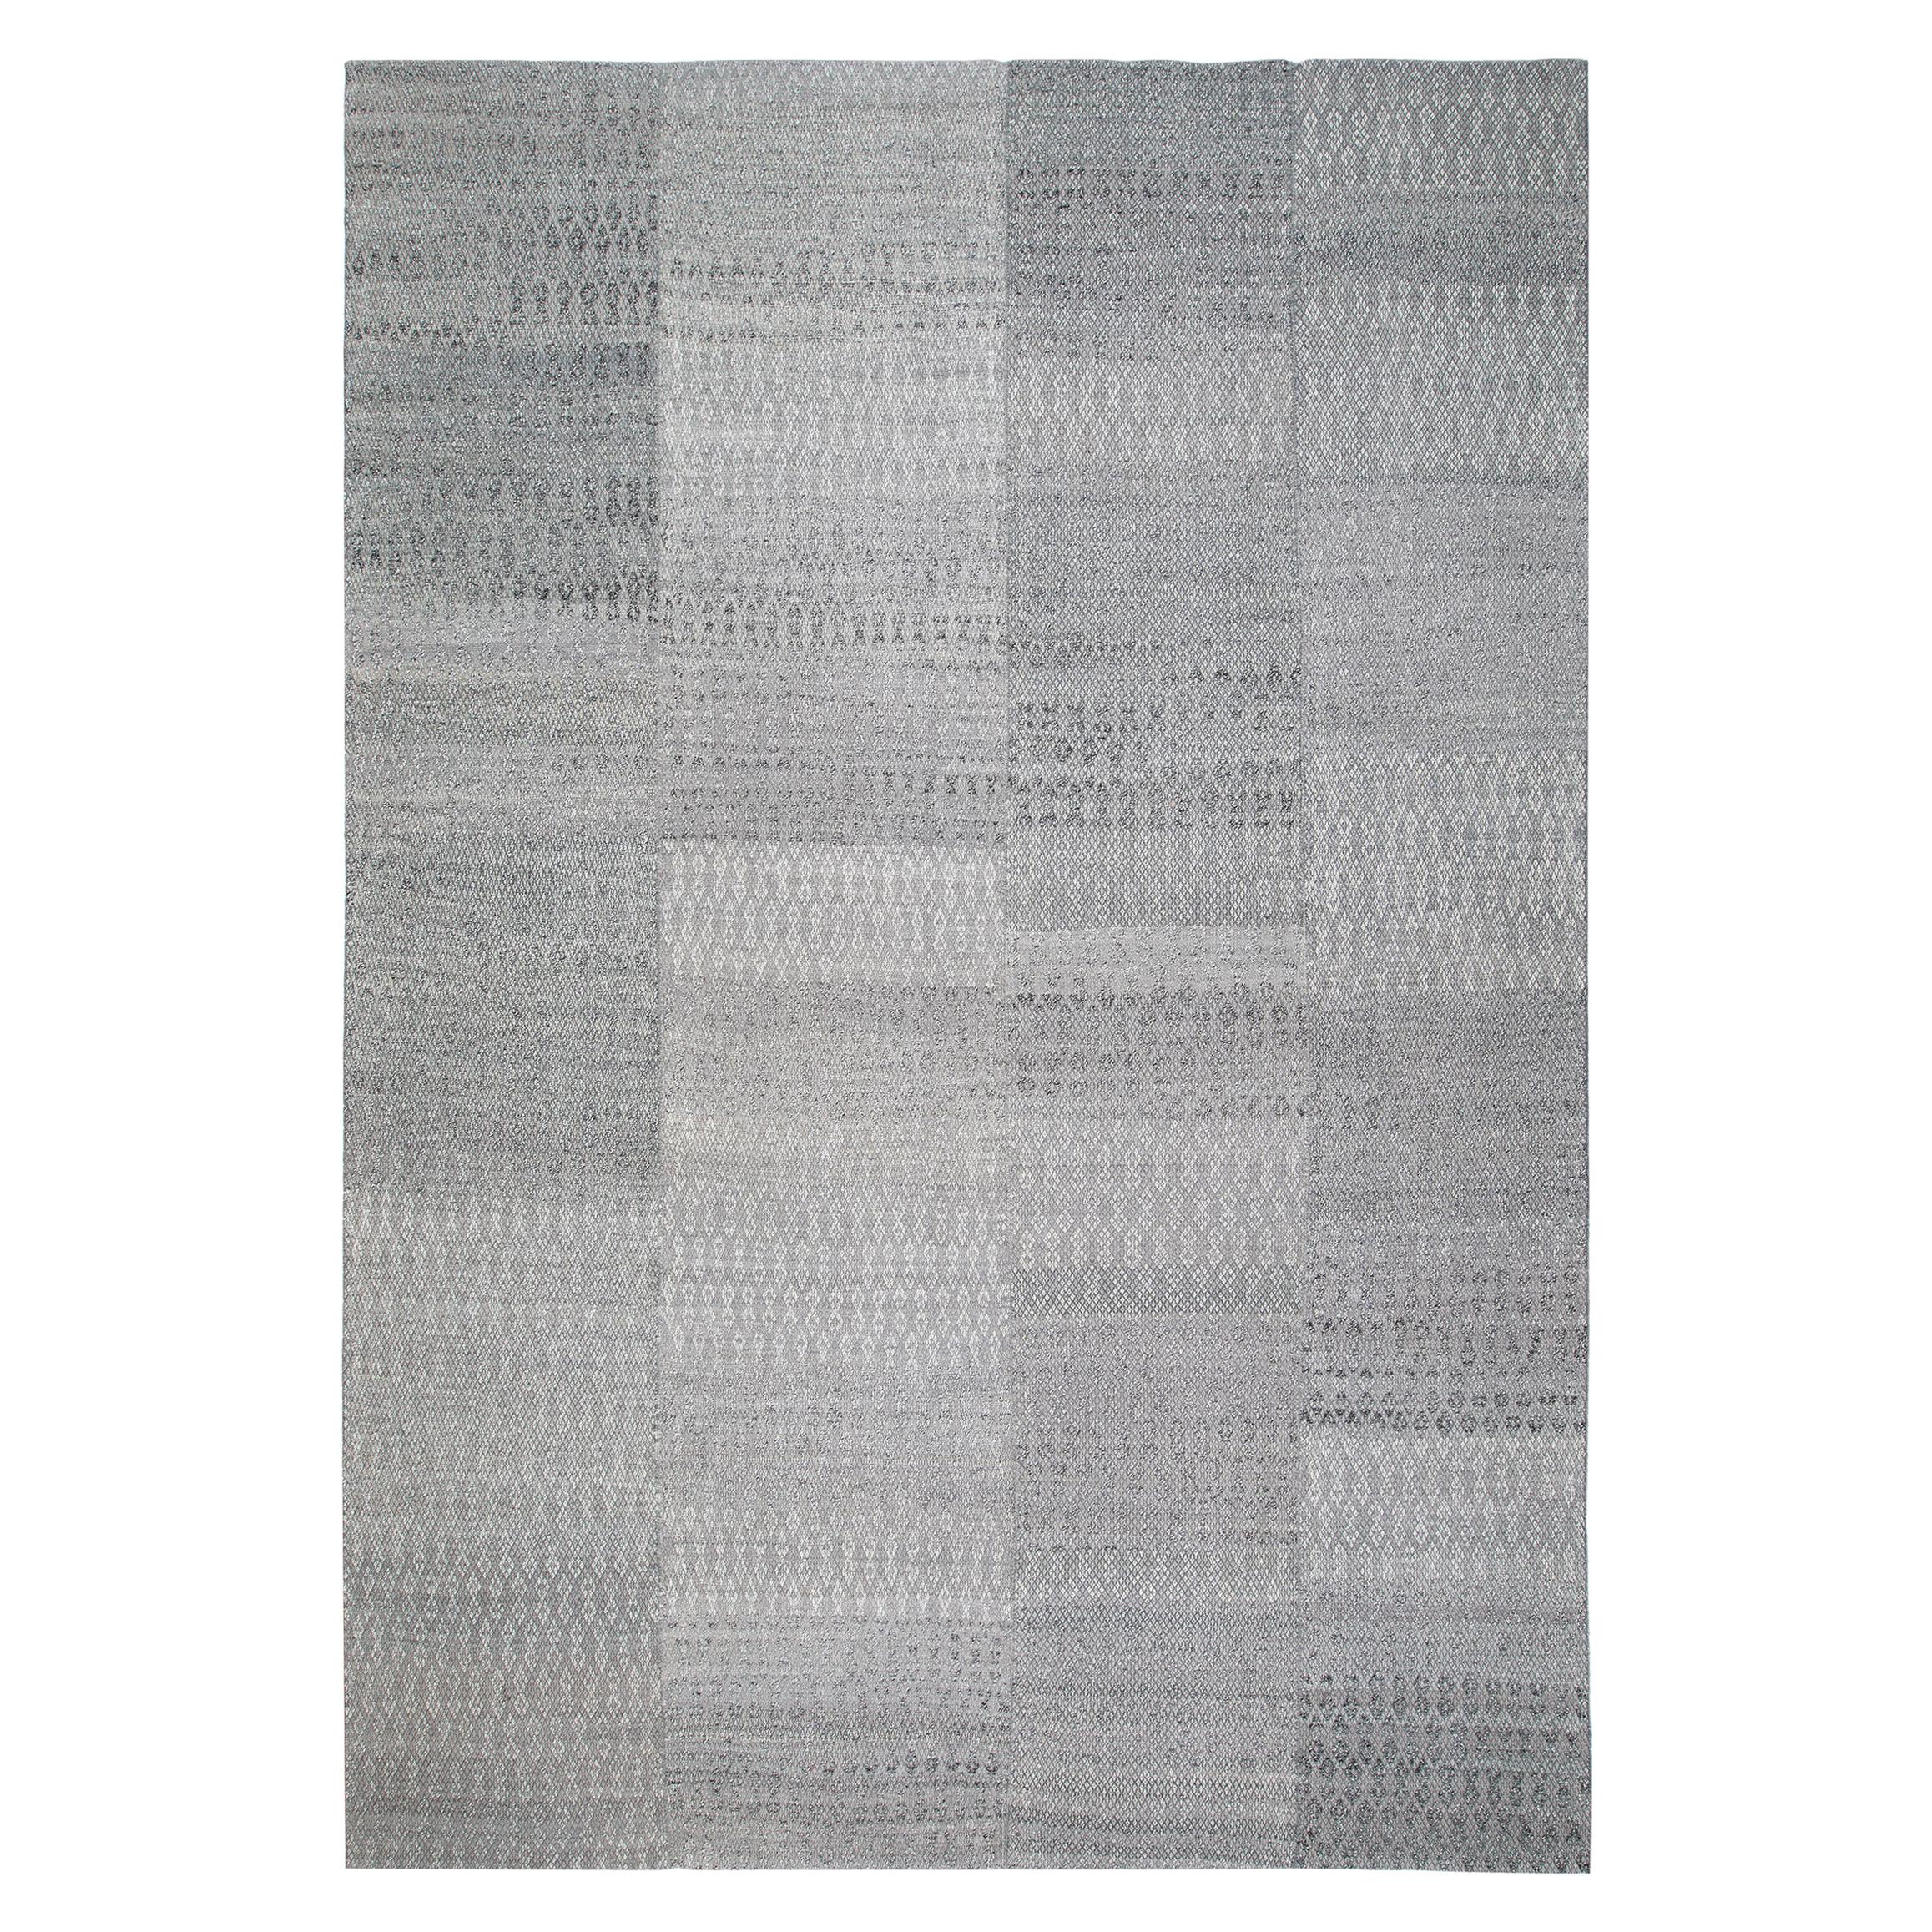 Decorative Modern Flat-Weave Rug in Textured Grey Color For Sale